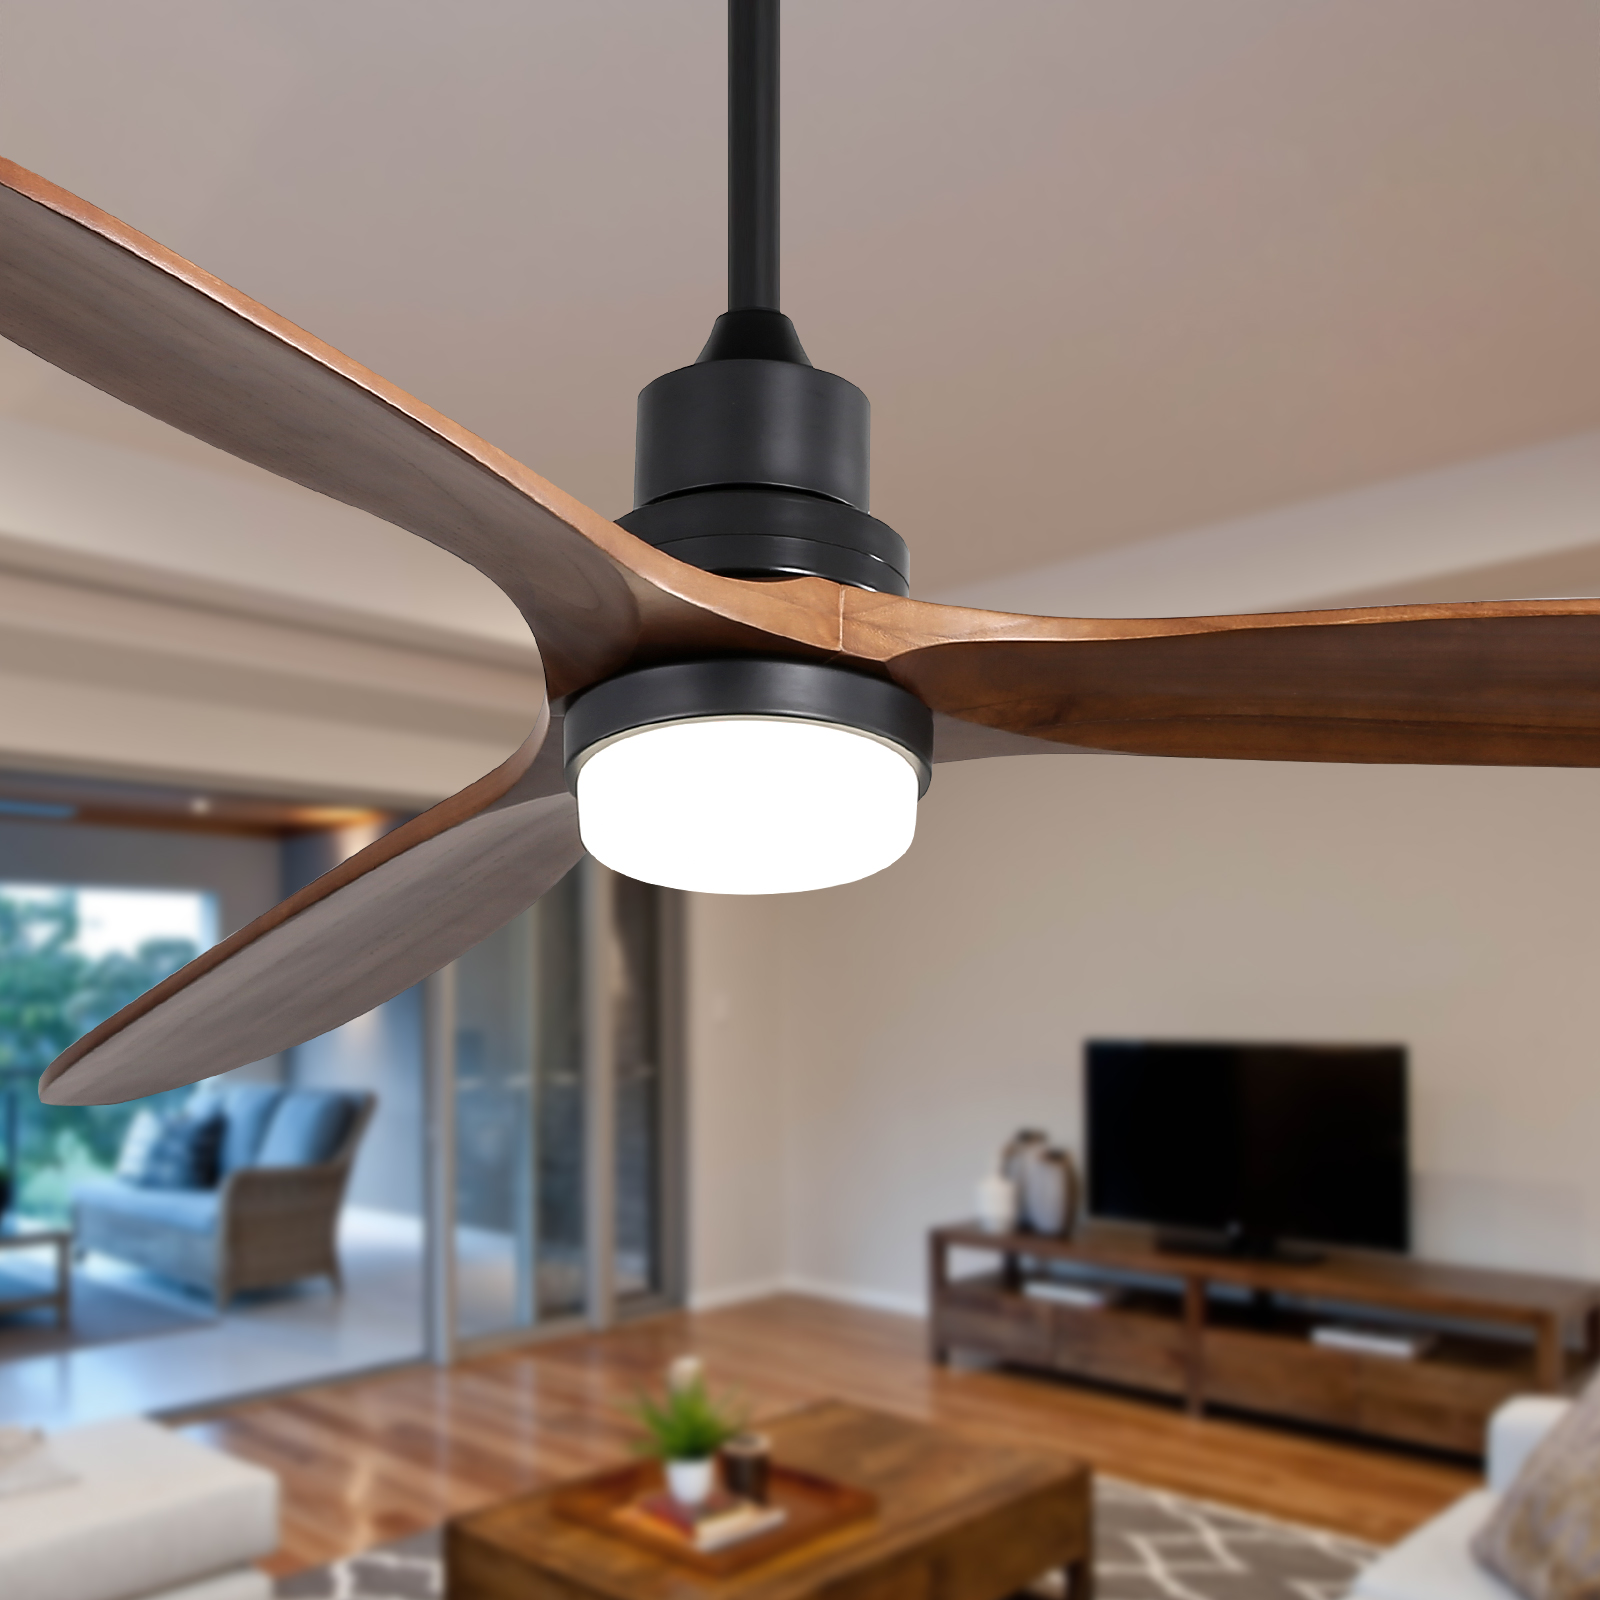 Ceiling Fan With Lights 3 Carved Wood Fan Blade Noiseless Reversible Motor Remote Control (Will be arrived in next 10 days)-Boyel Living